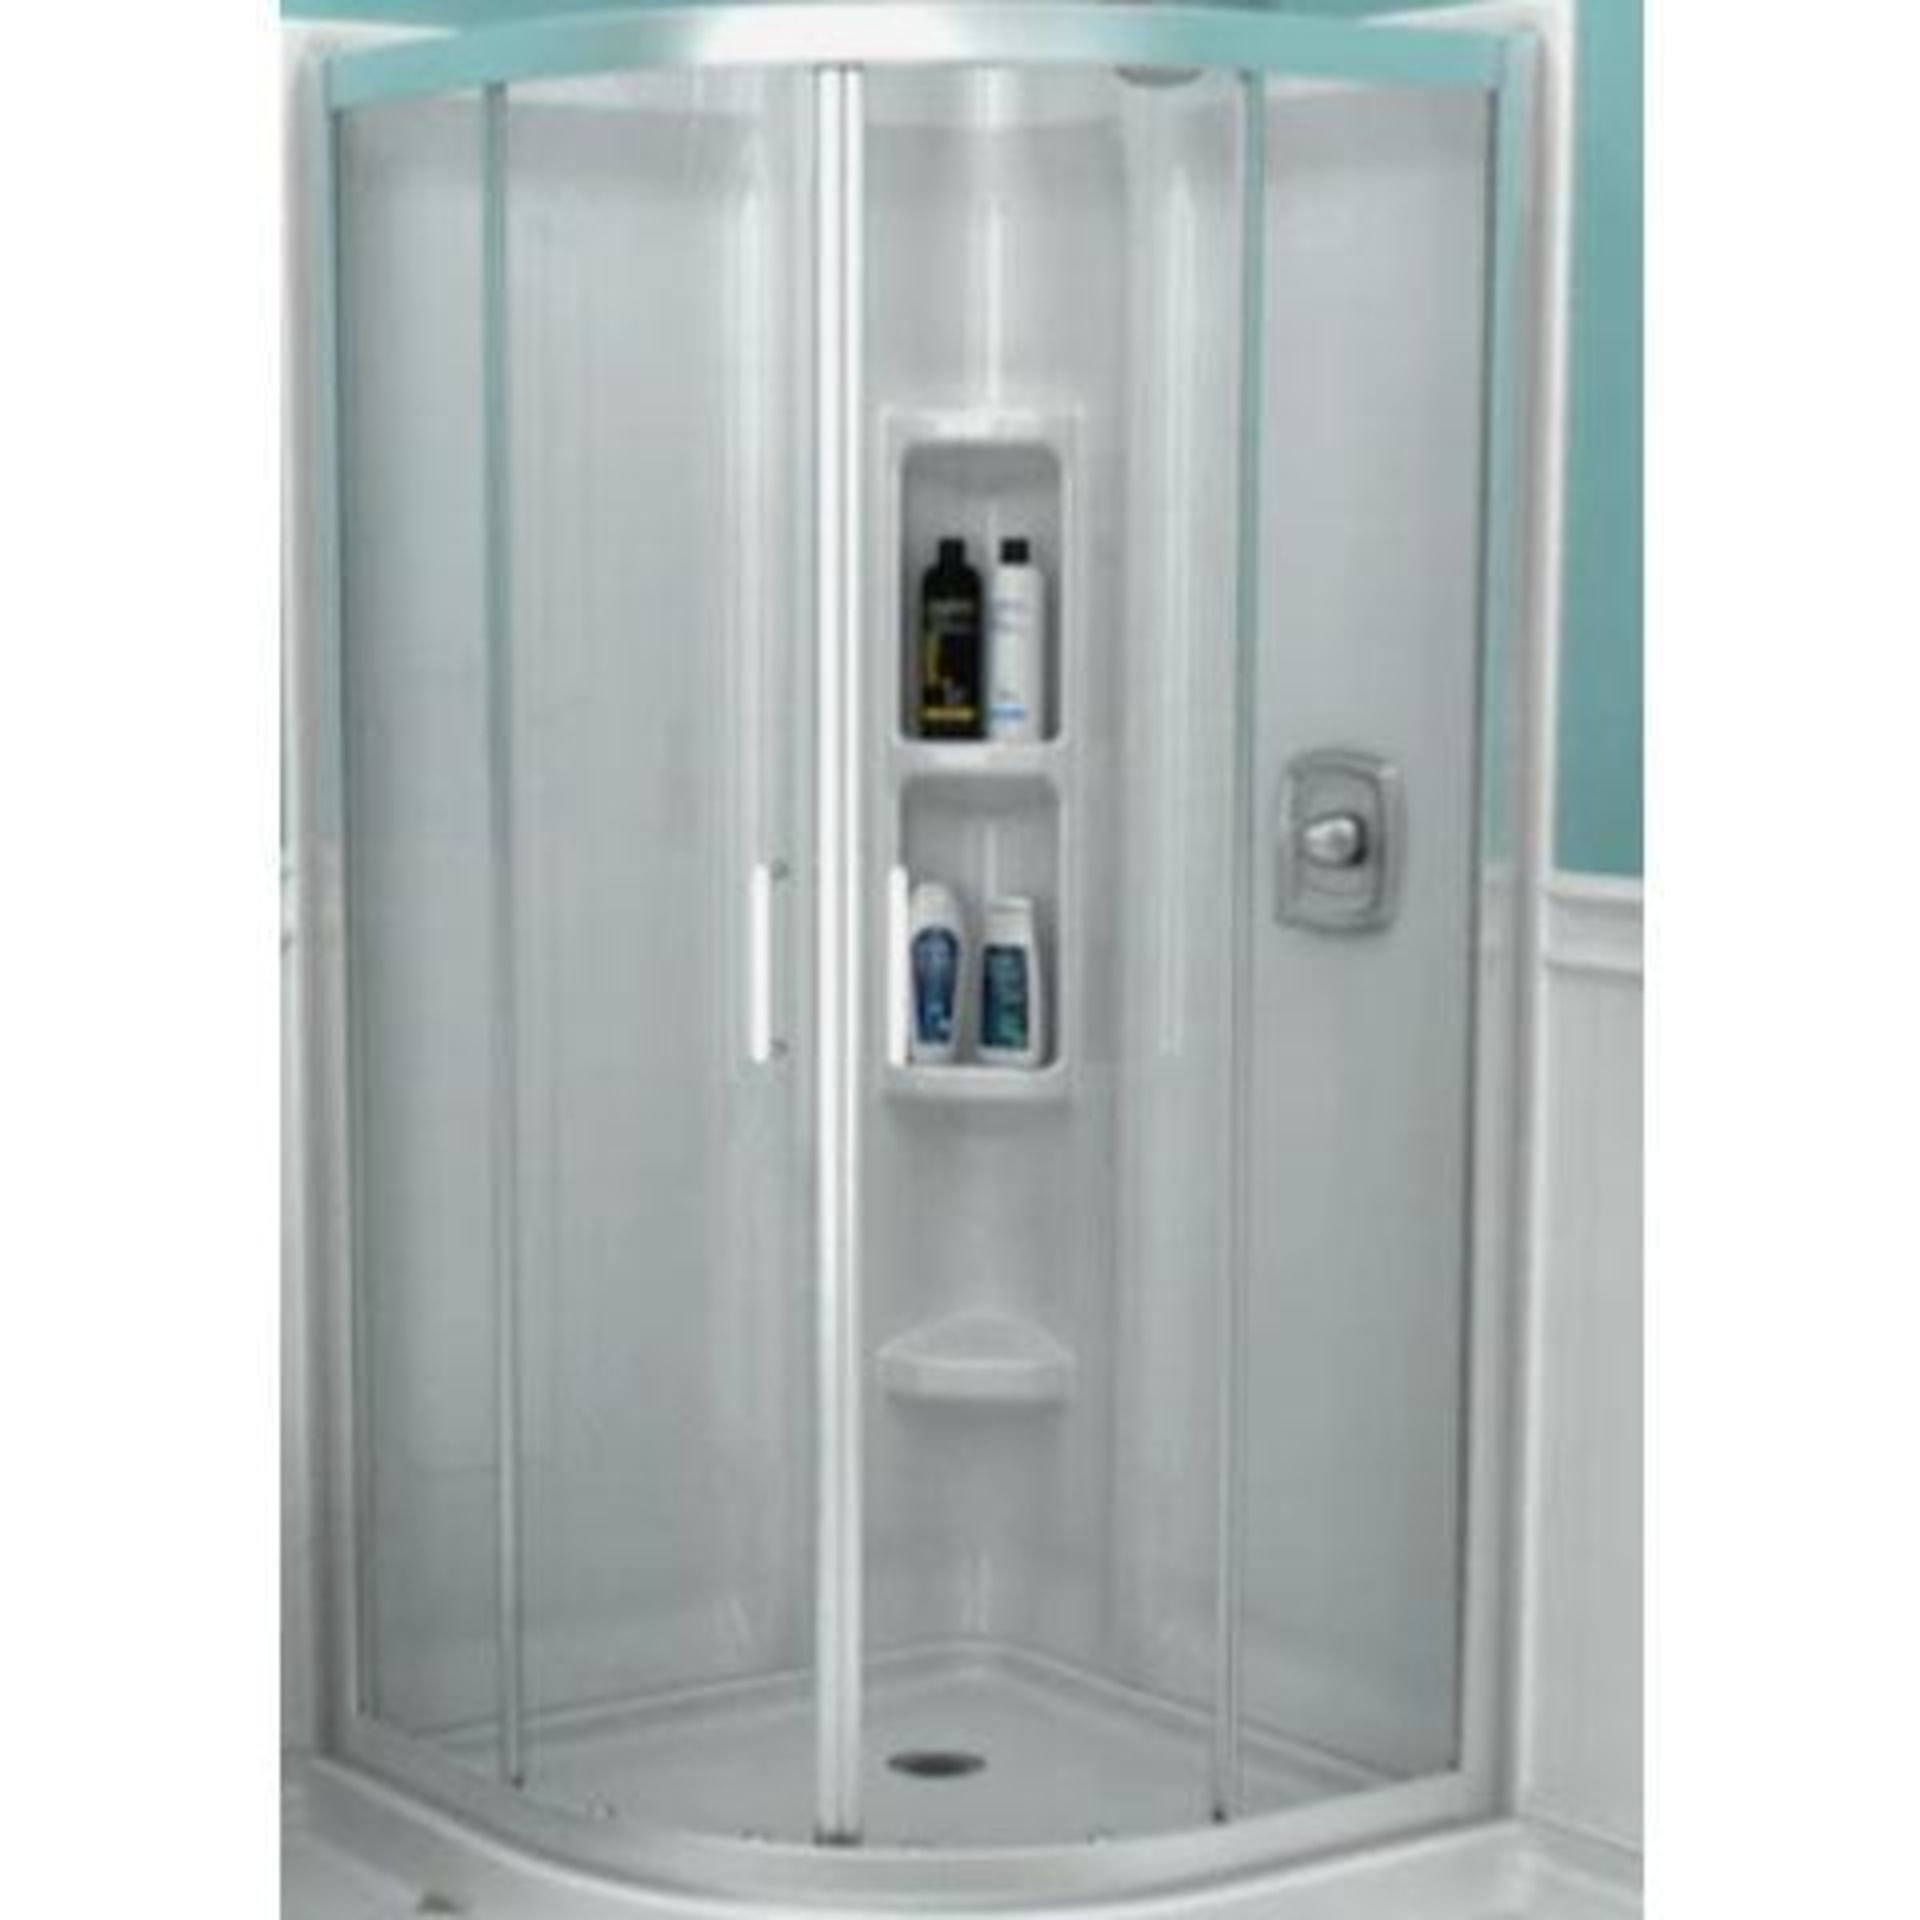 (3) American Standard Axis Corner Curved Shower Doors, Model AM3838A1.400.213, Only Contains Curved